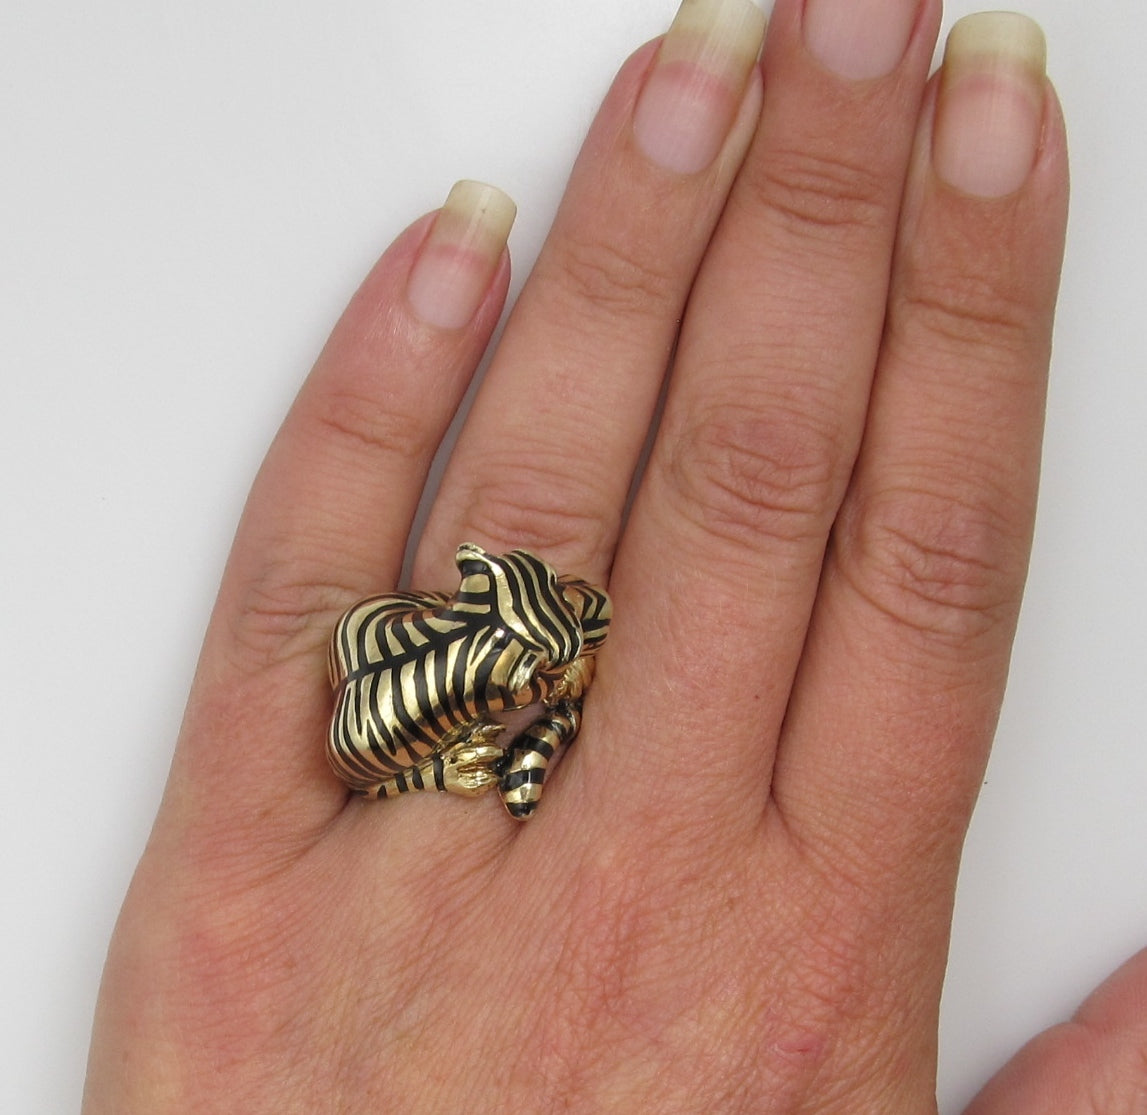 Vintage 14k Gold Enamel Tiger Ring With Diamond Eyes And A .20ct Diamond In It's Mouth